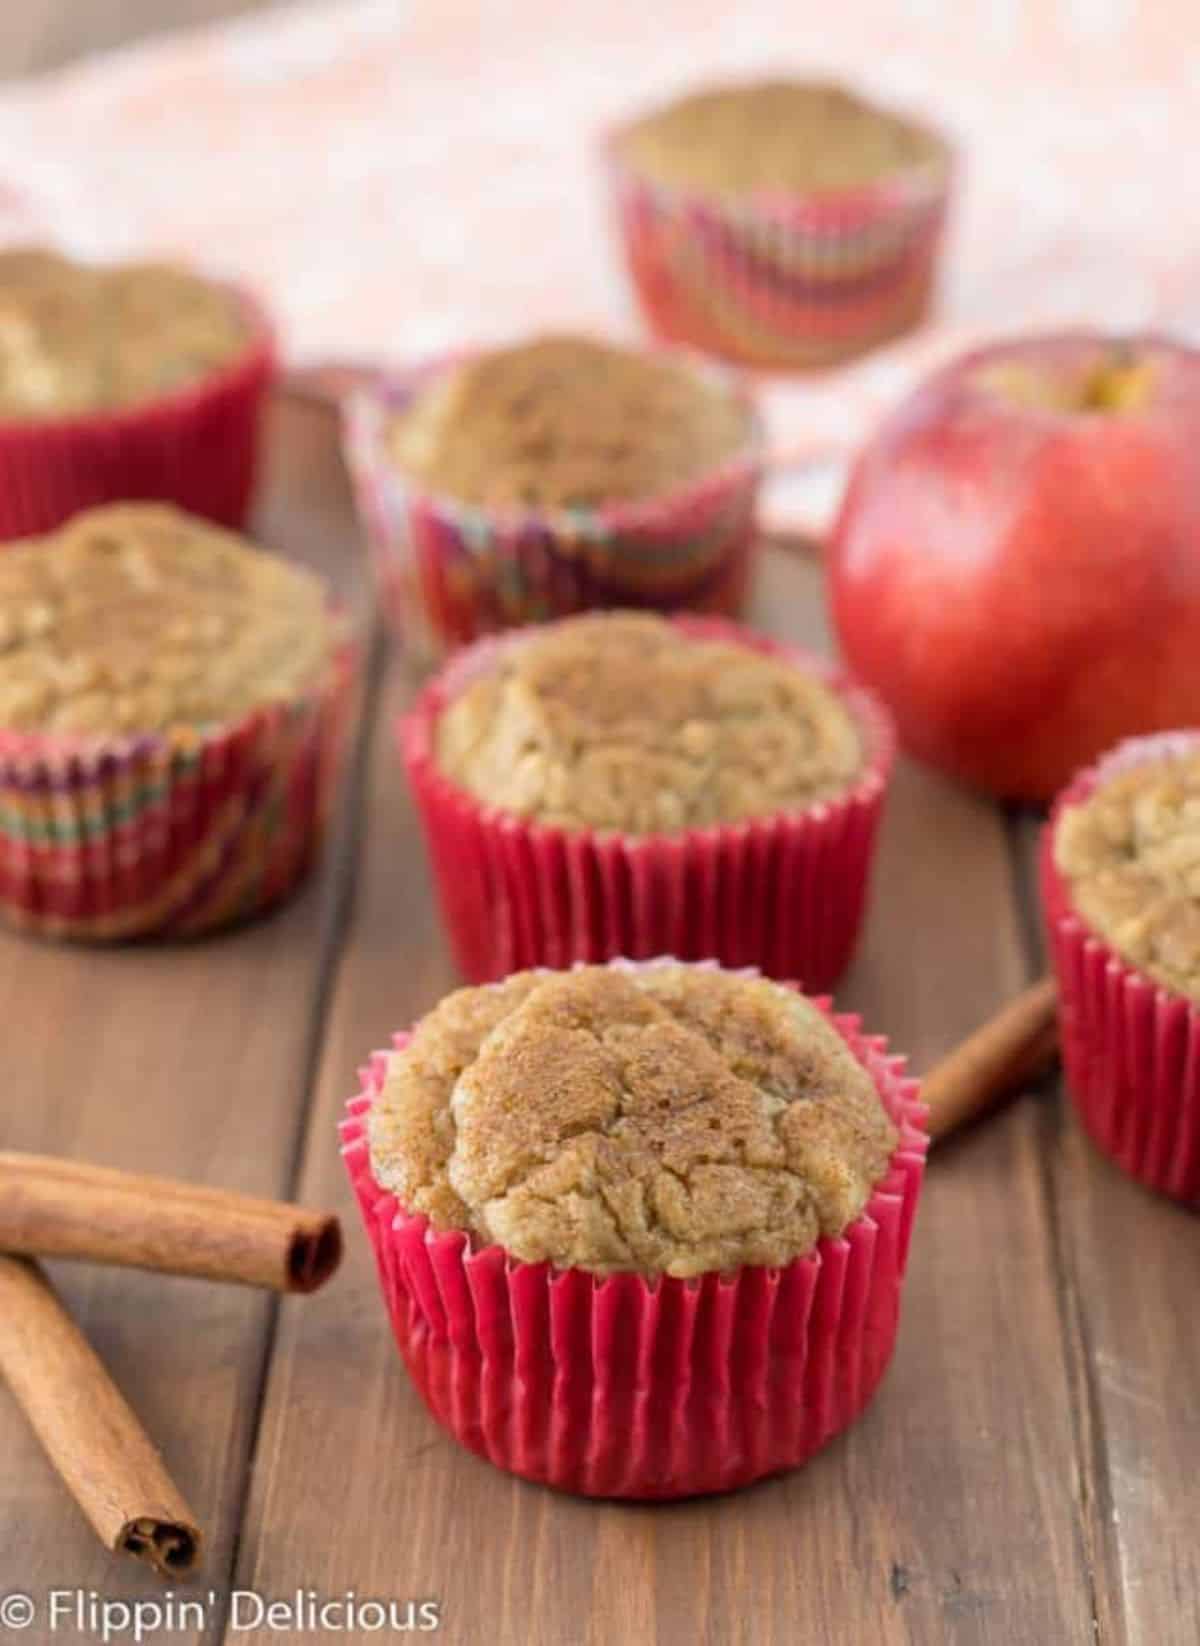 Scrumptious Gluten-Free Apple Muffins on a wooden table with cinnamon sticks.